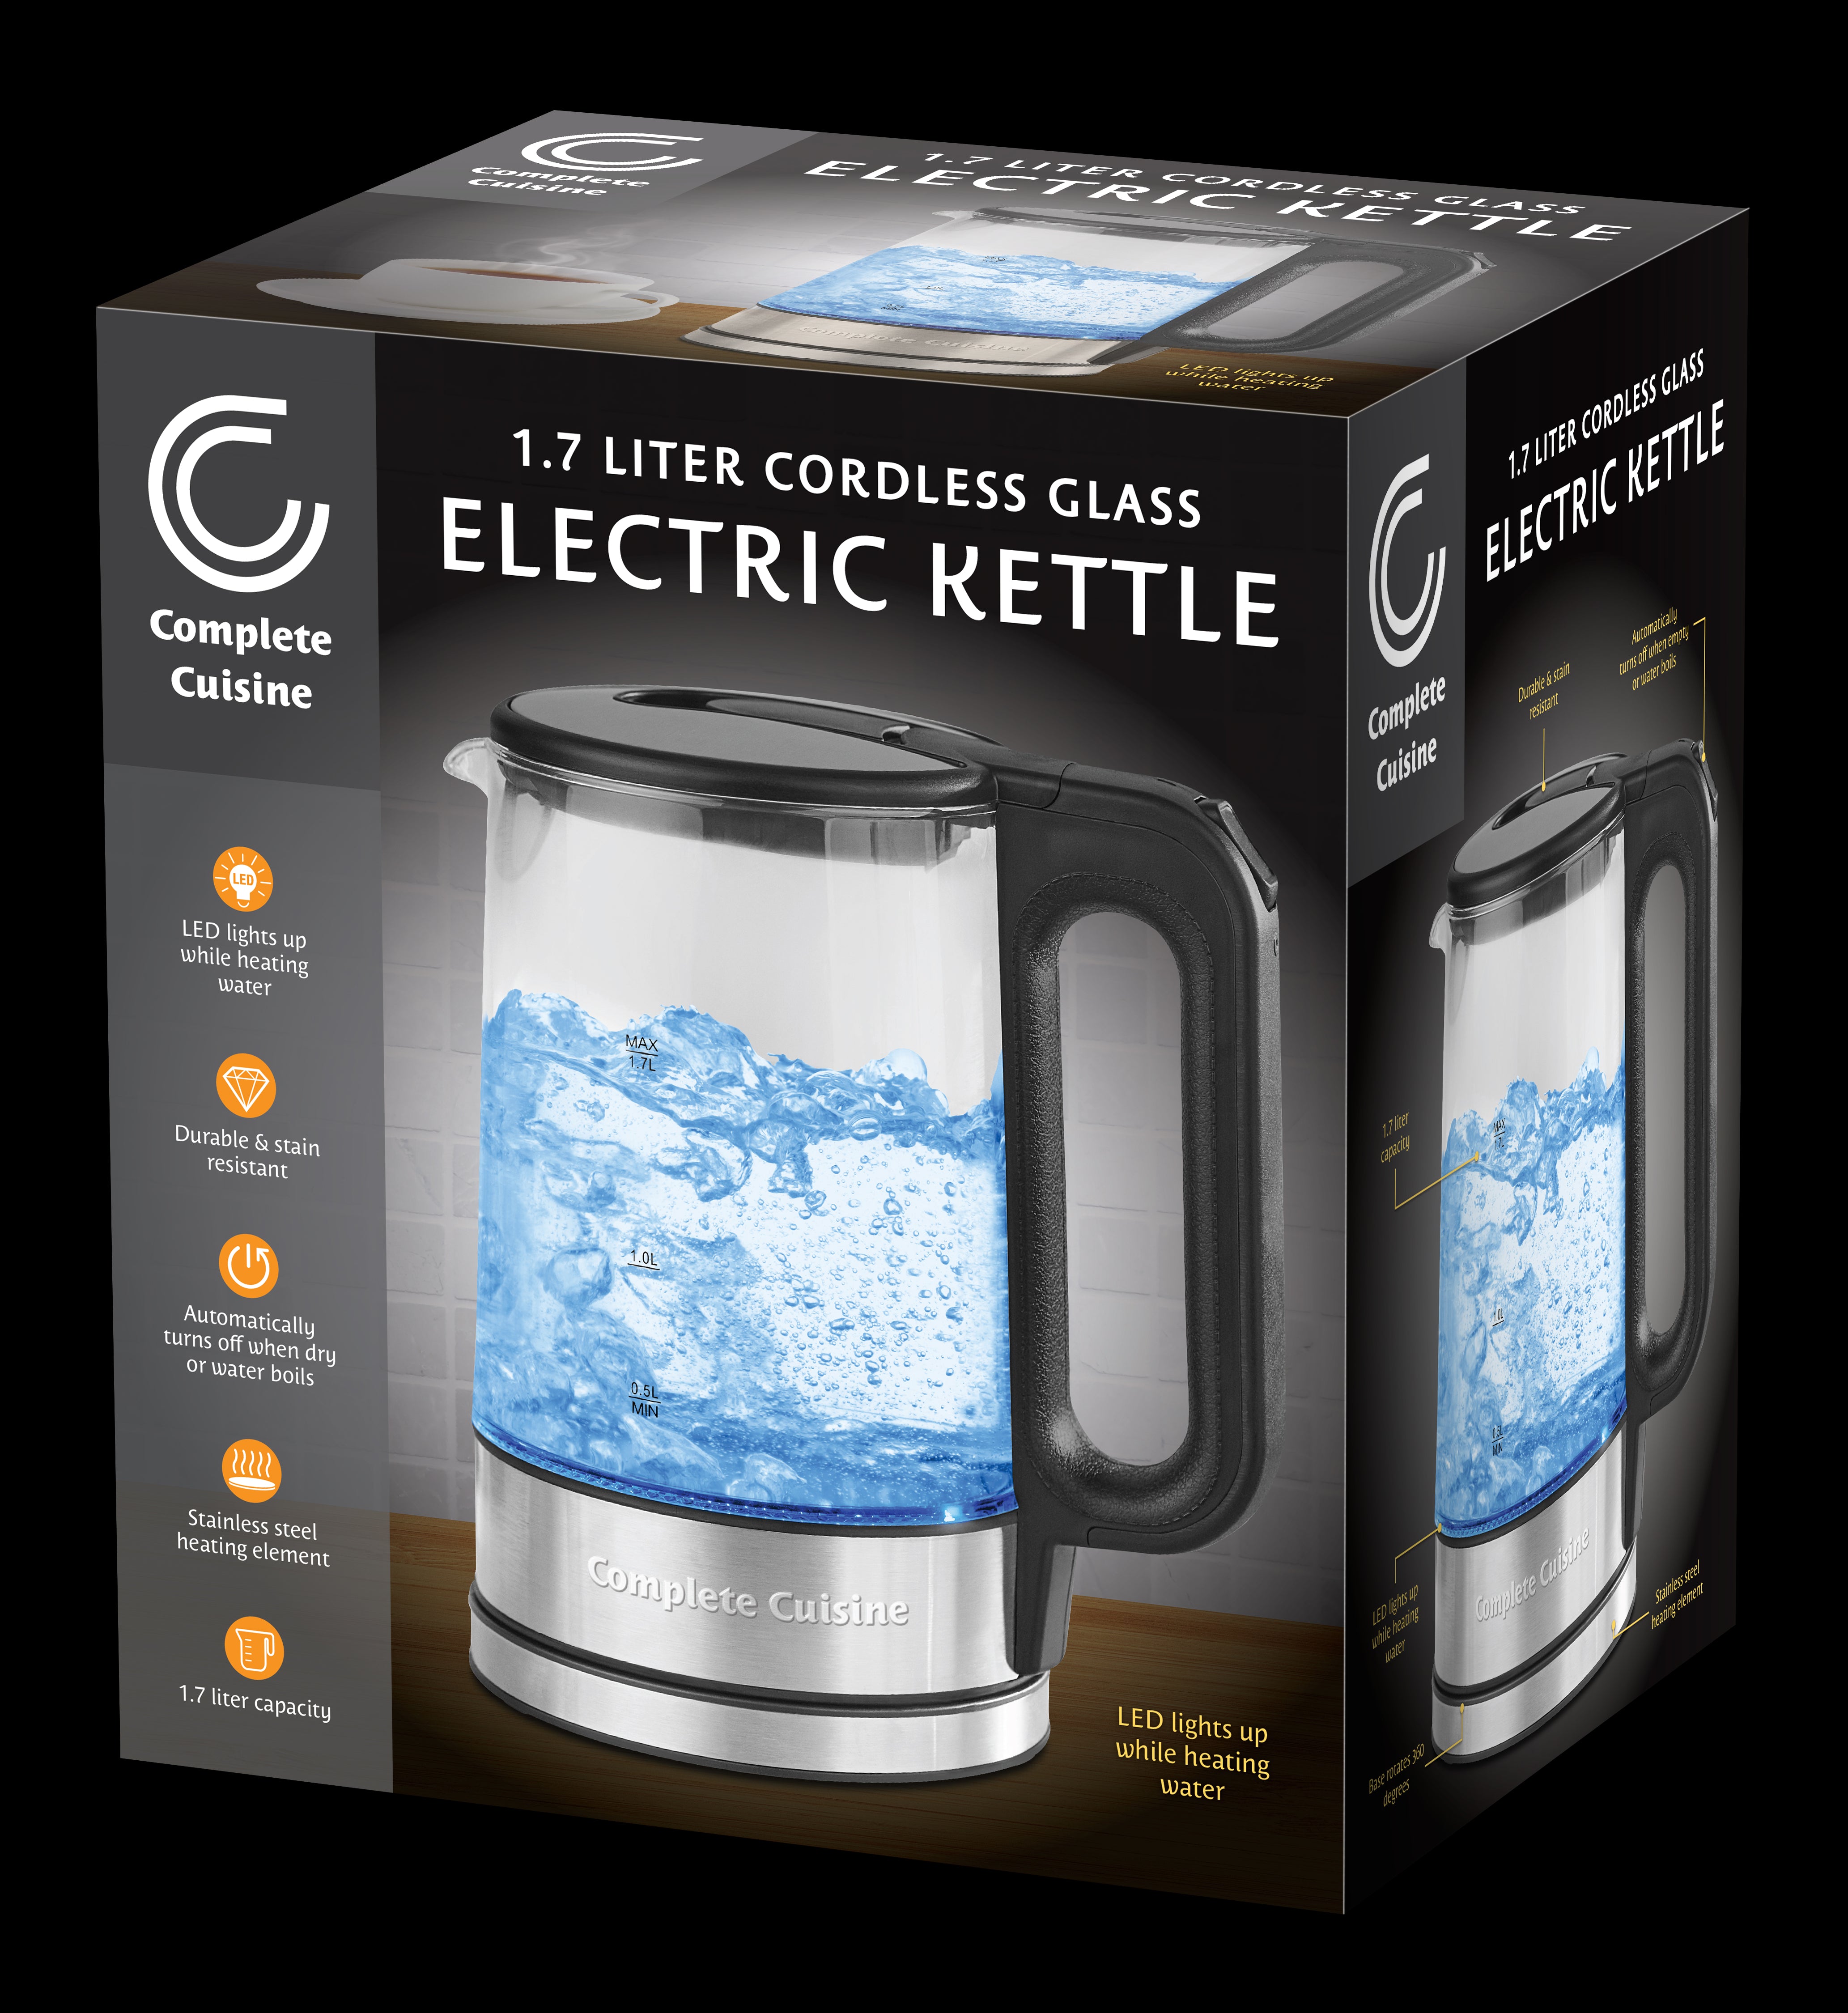 1.7 Liter Cordless Glass Electric Kettle, with Blue LED Indicator Light and Auto-Shutoff & Boil-Dry Protection